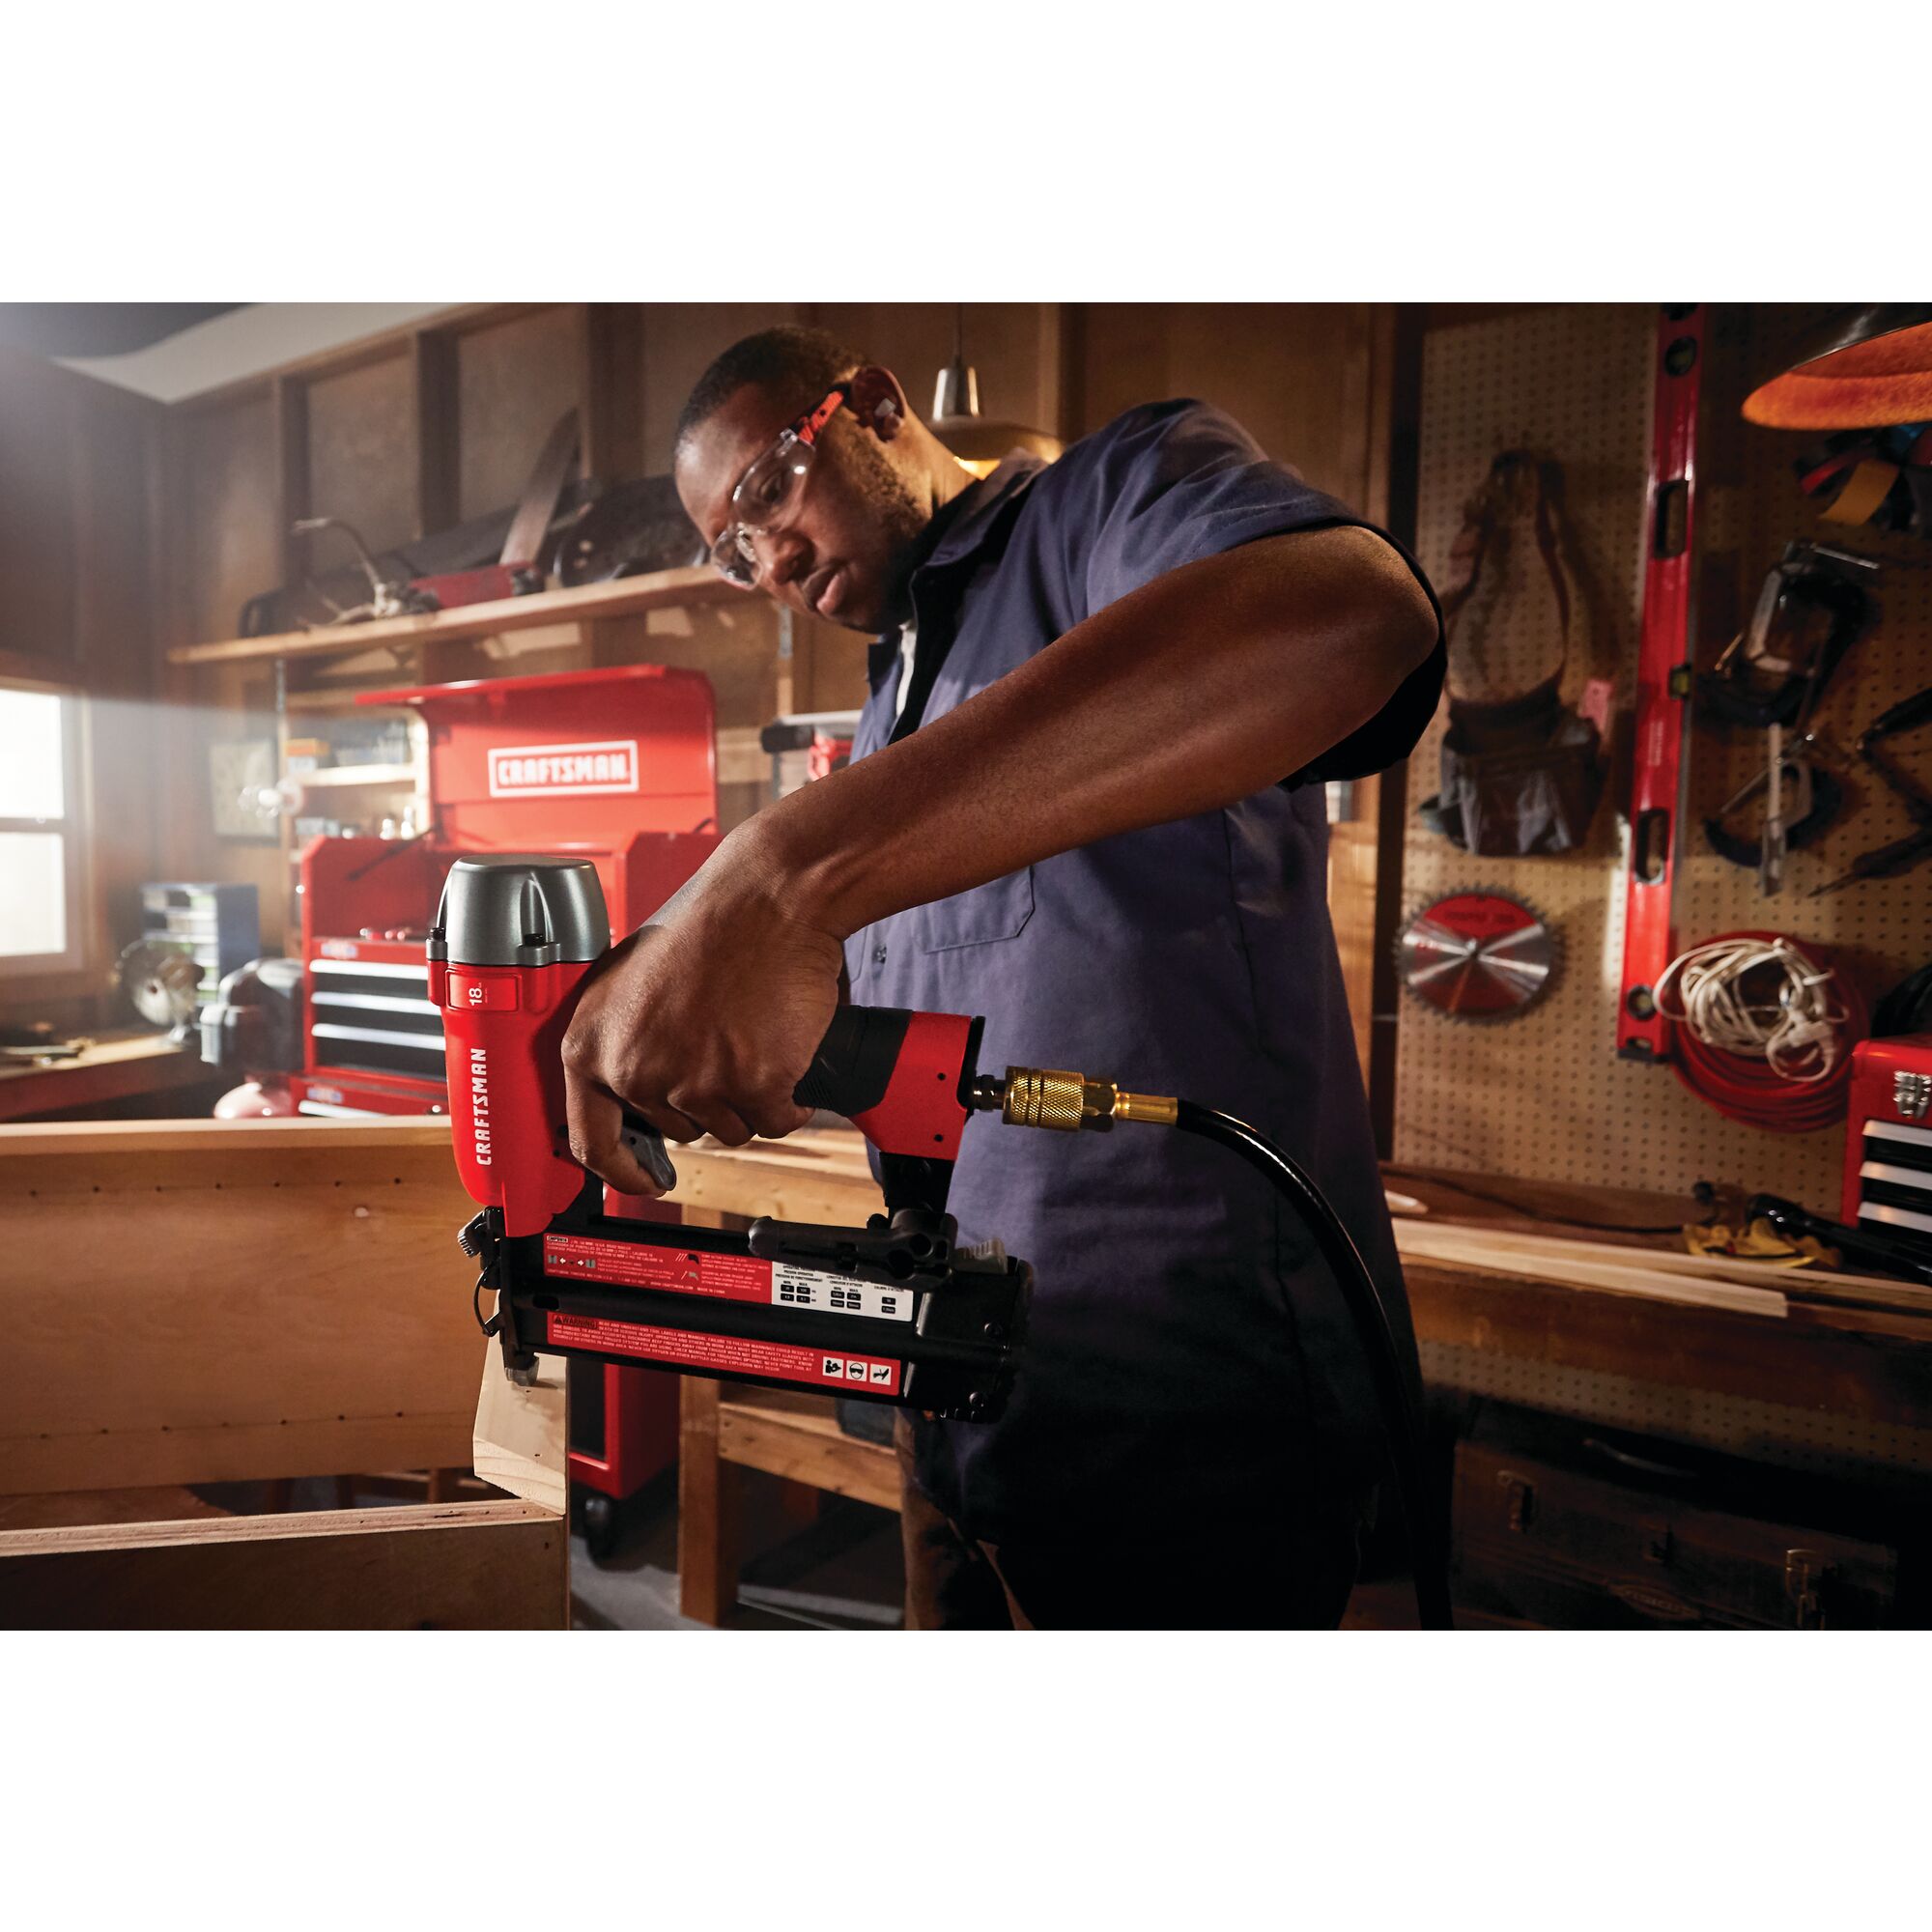 18 gauge brad nailer being used to nail a wooden strip by a person.